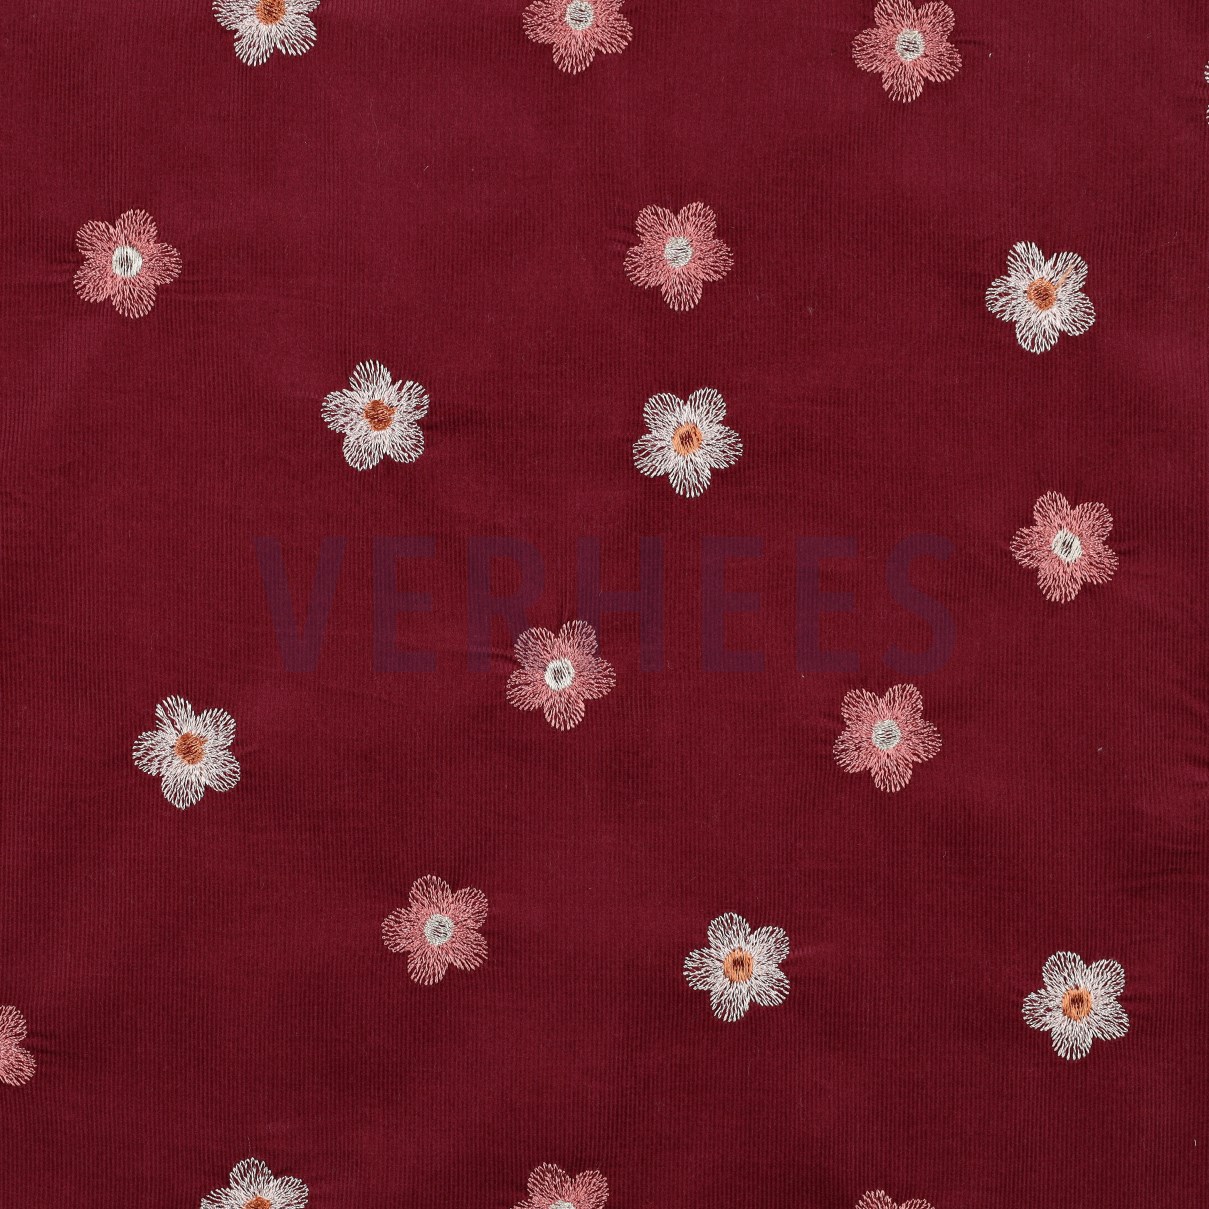 BABYCORD 21W EMBROIDERY FLOWER BORDEAUX (high resolution)